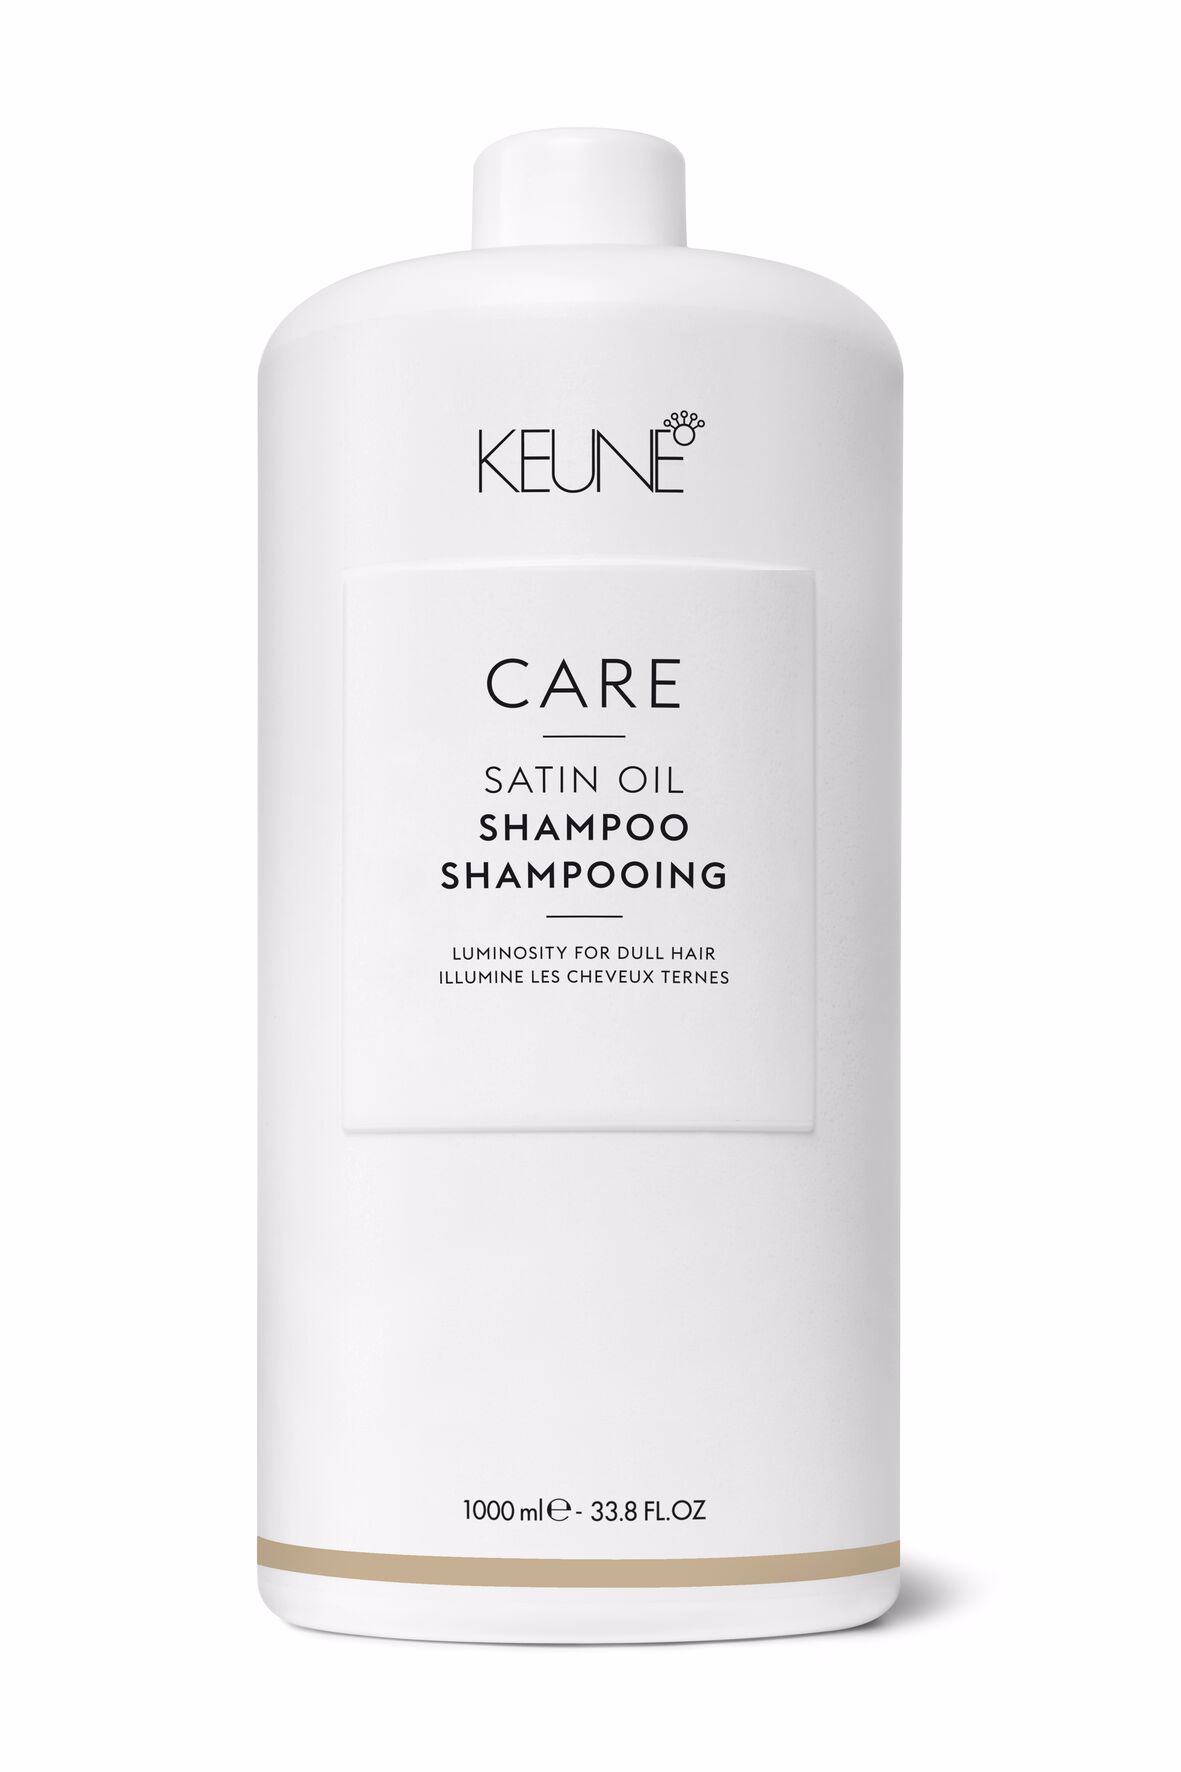 Satin Oil Shampoo is the ideal hairproduct for dry, dull hair. Thanks to its innovative, lightweight formula, your hair will shine with a fresh, healthy, and glossy appearance. Keune.ch.